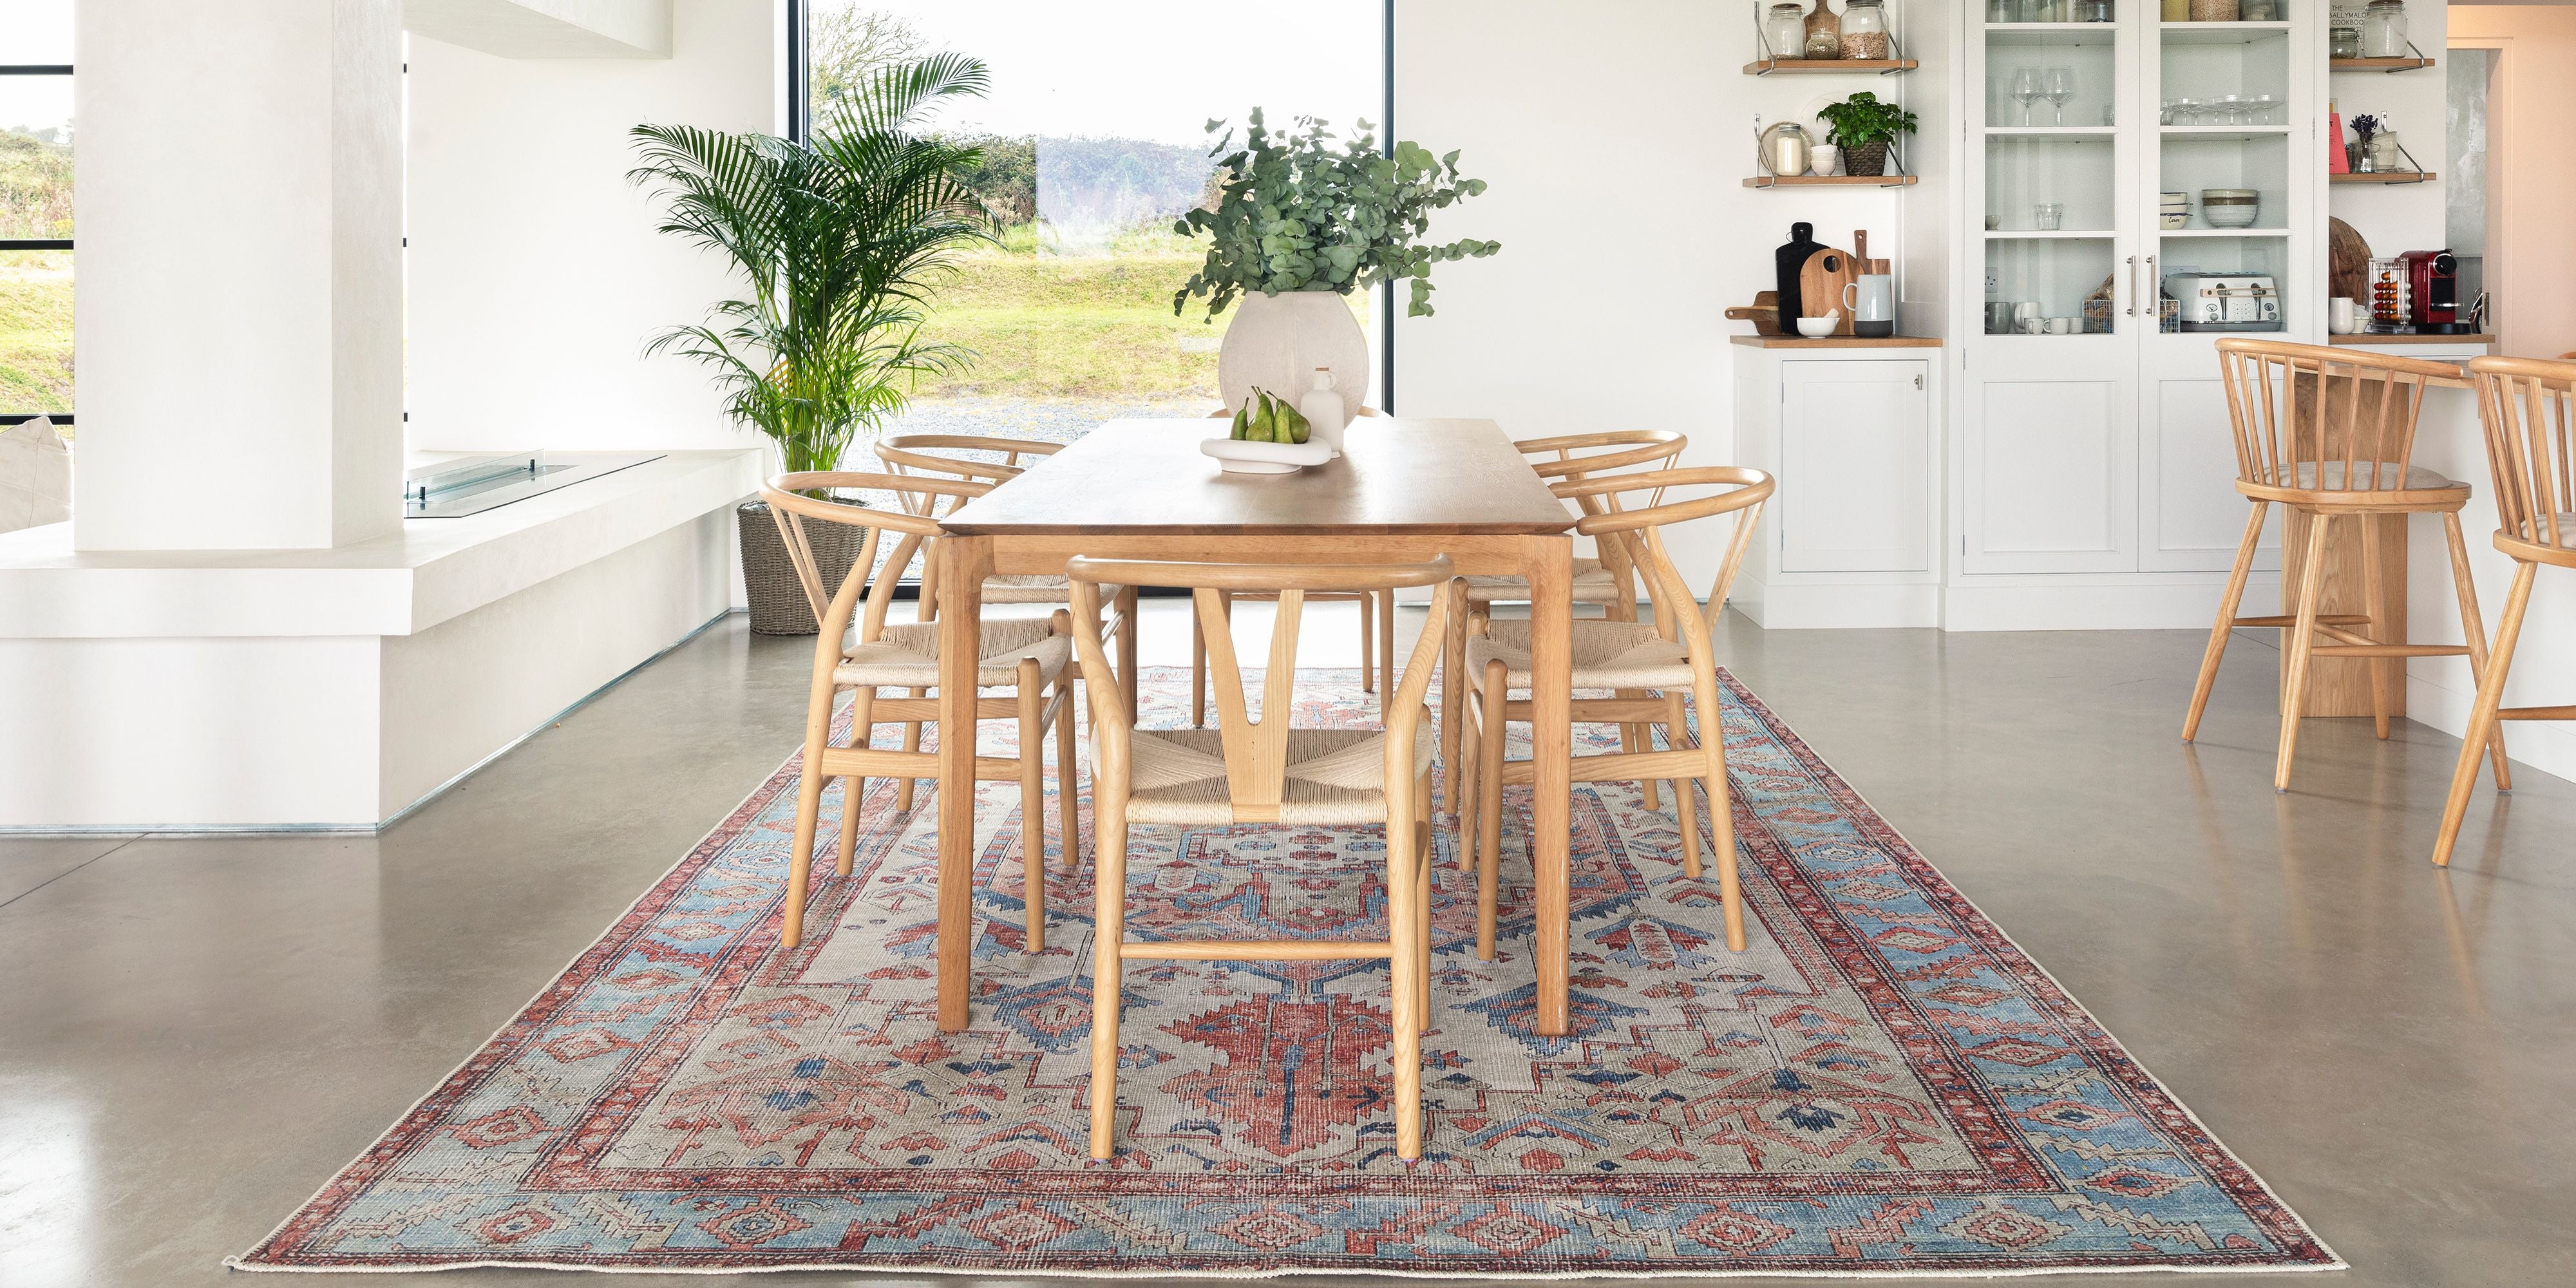 What Are the Best Rugs for Dining Rooms?